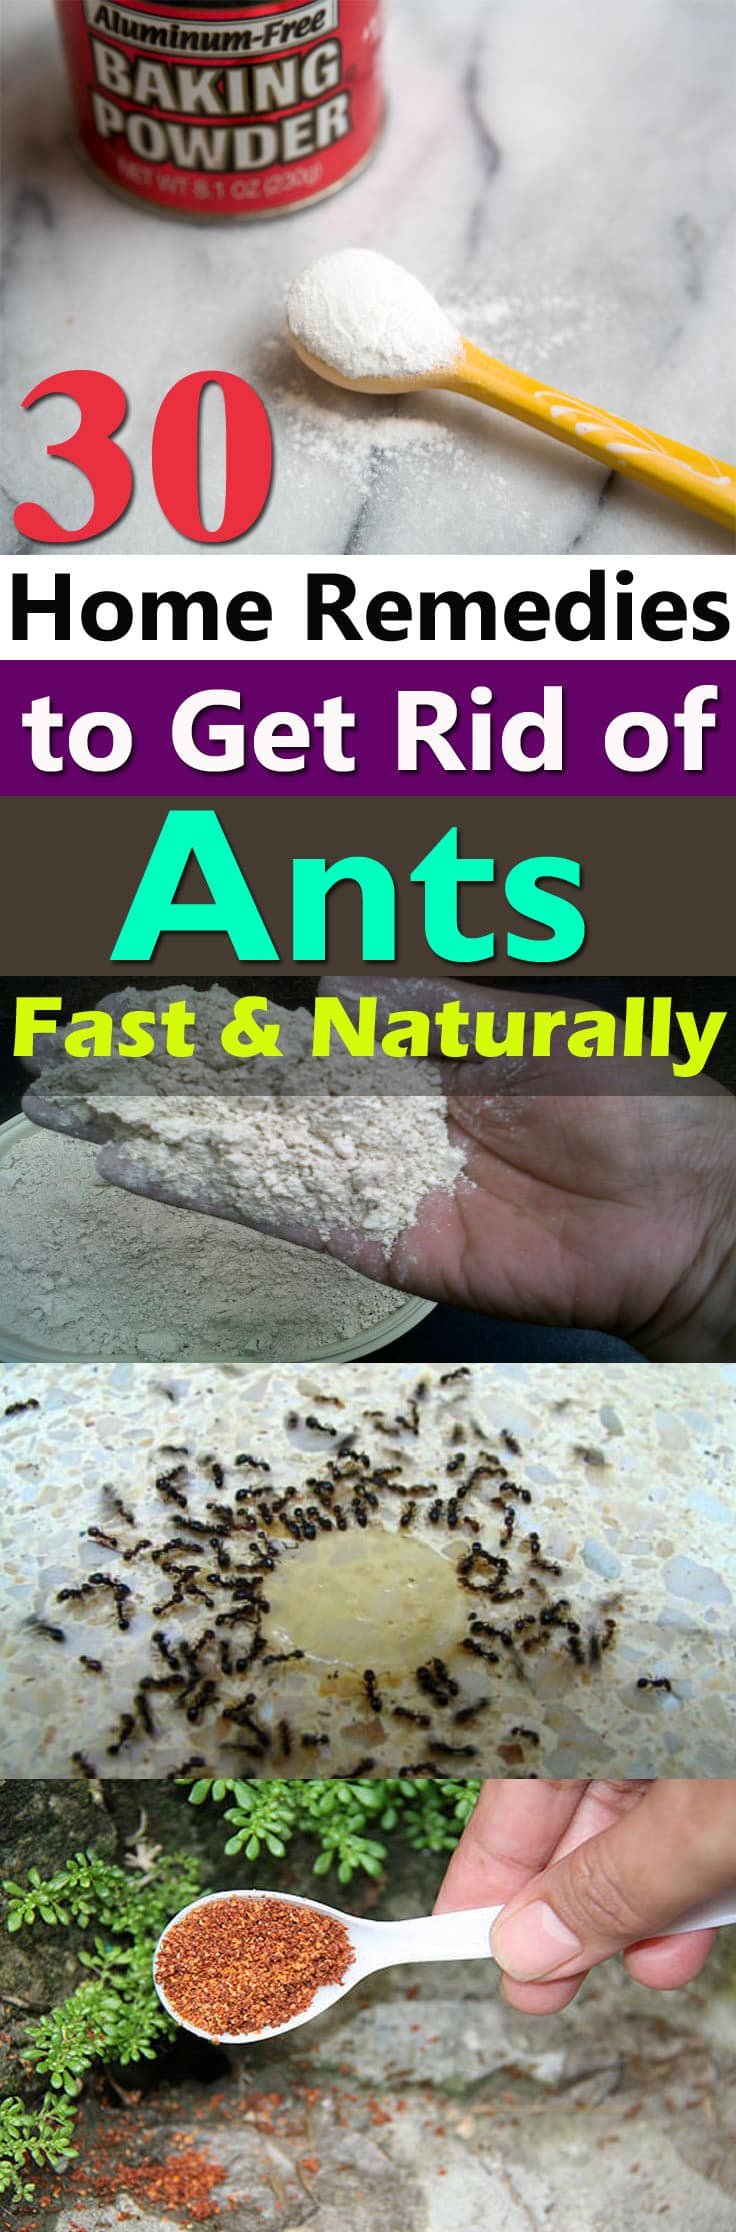 If you don't want to see ants crawling in your home and garden. Try one of these 30 Natural Home Remedies to Get Rid of Ants!